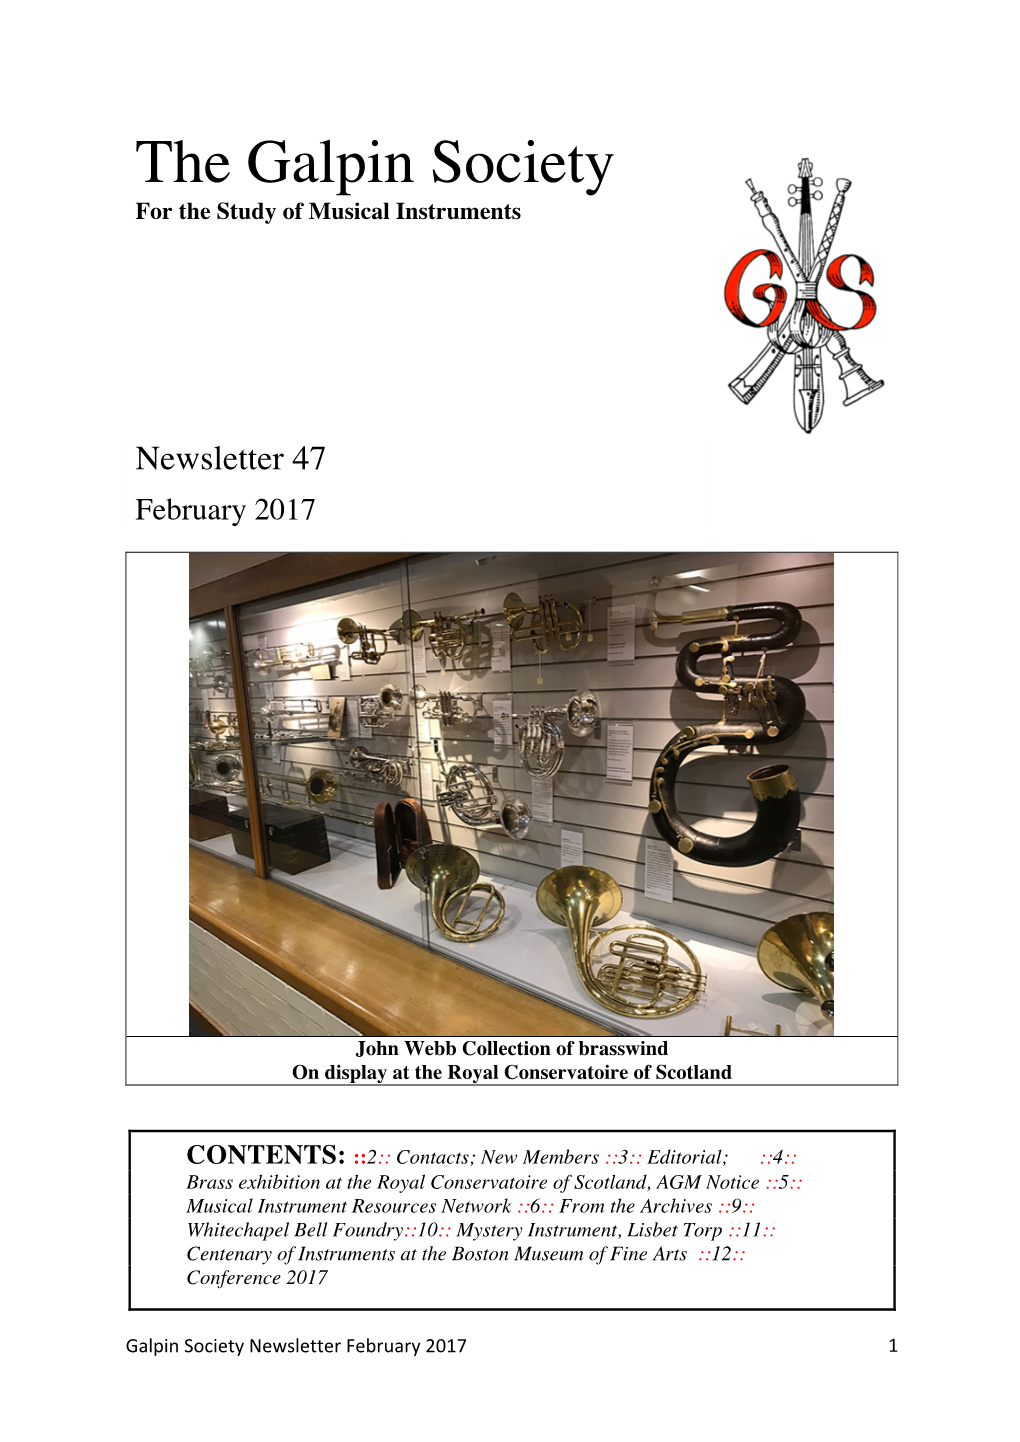 The Galpin Society for the Study of Musical Instruments